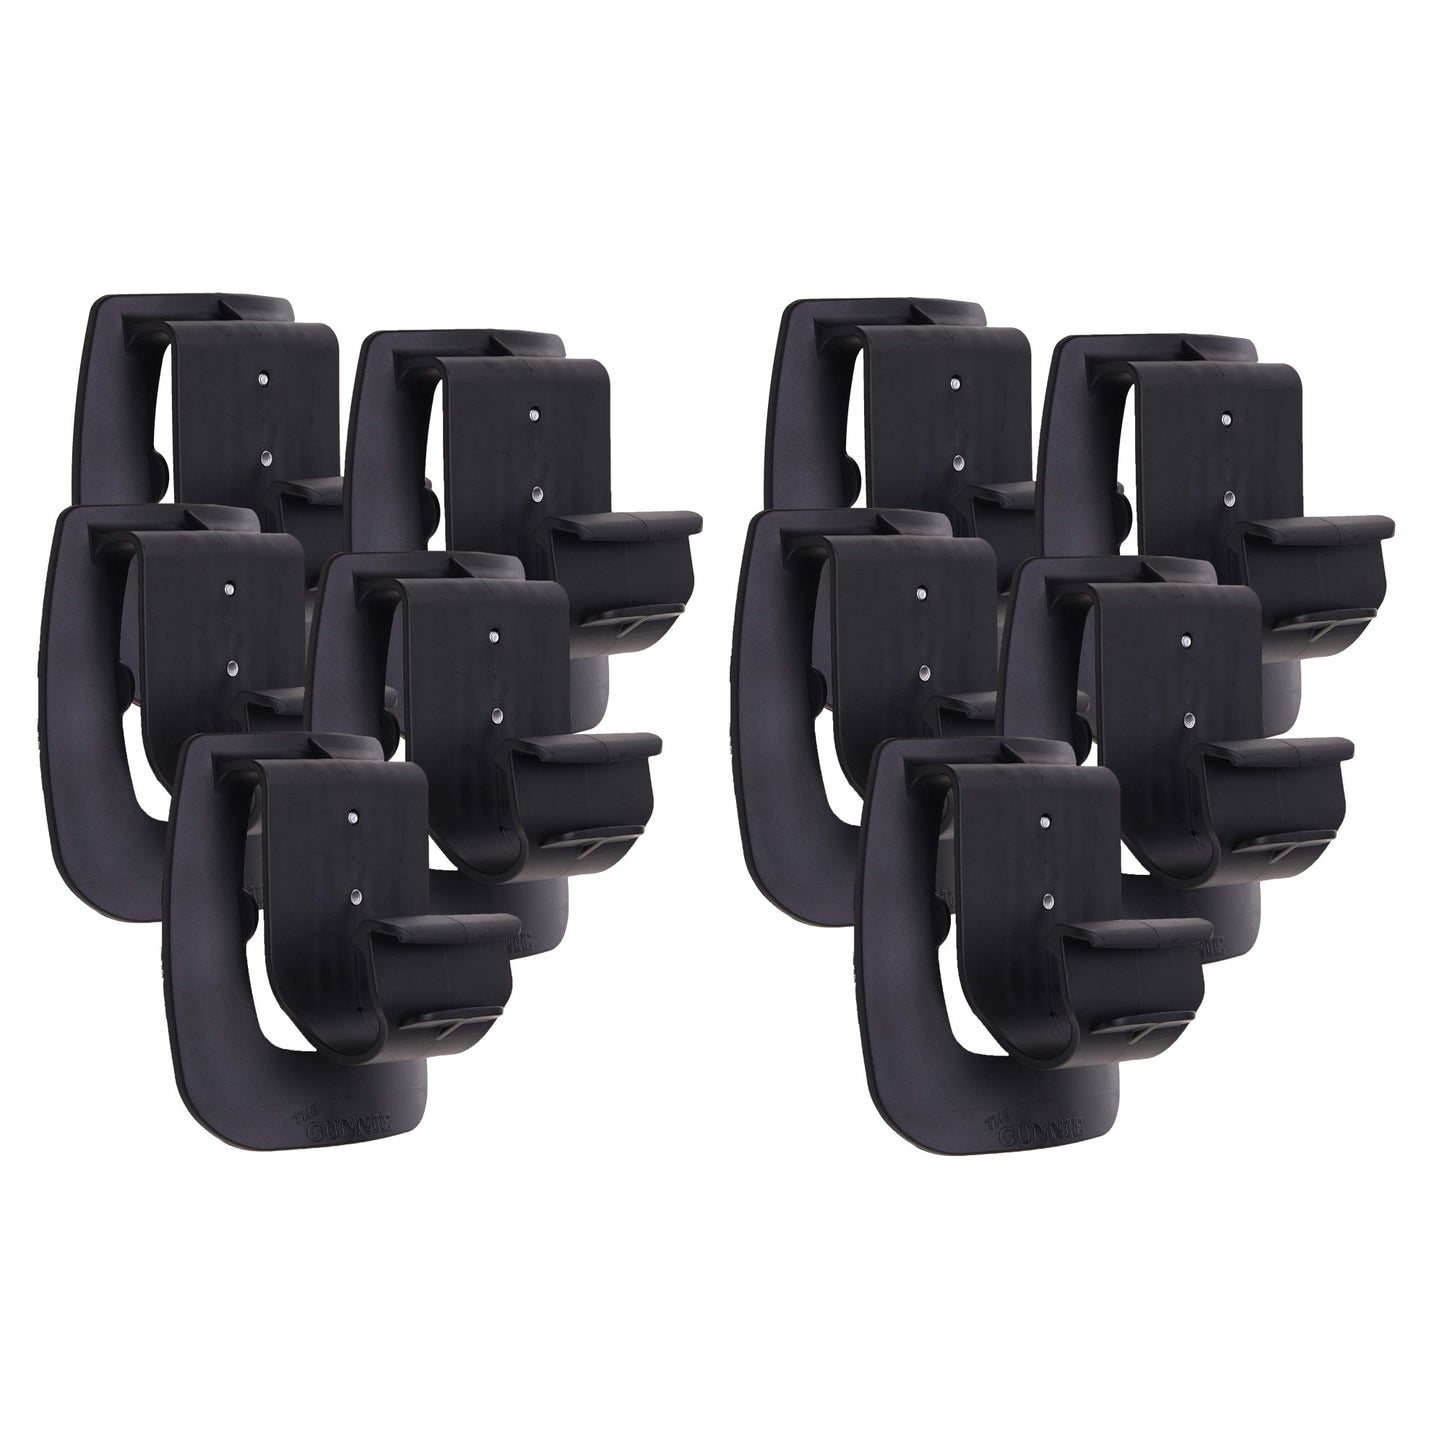 The Gunnie Universal Cordless Drill Holster / Hook 10-Pack